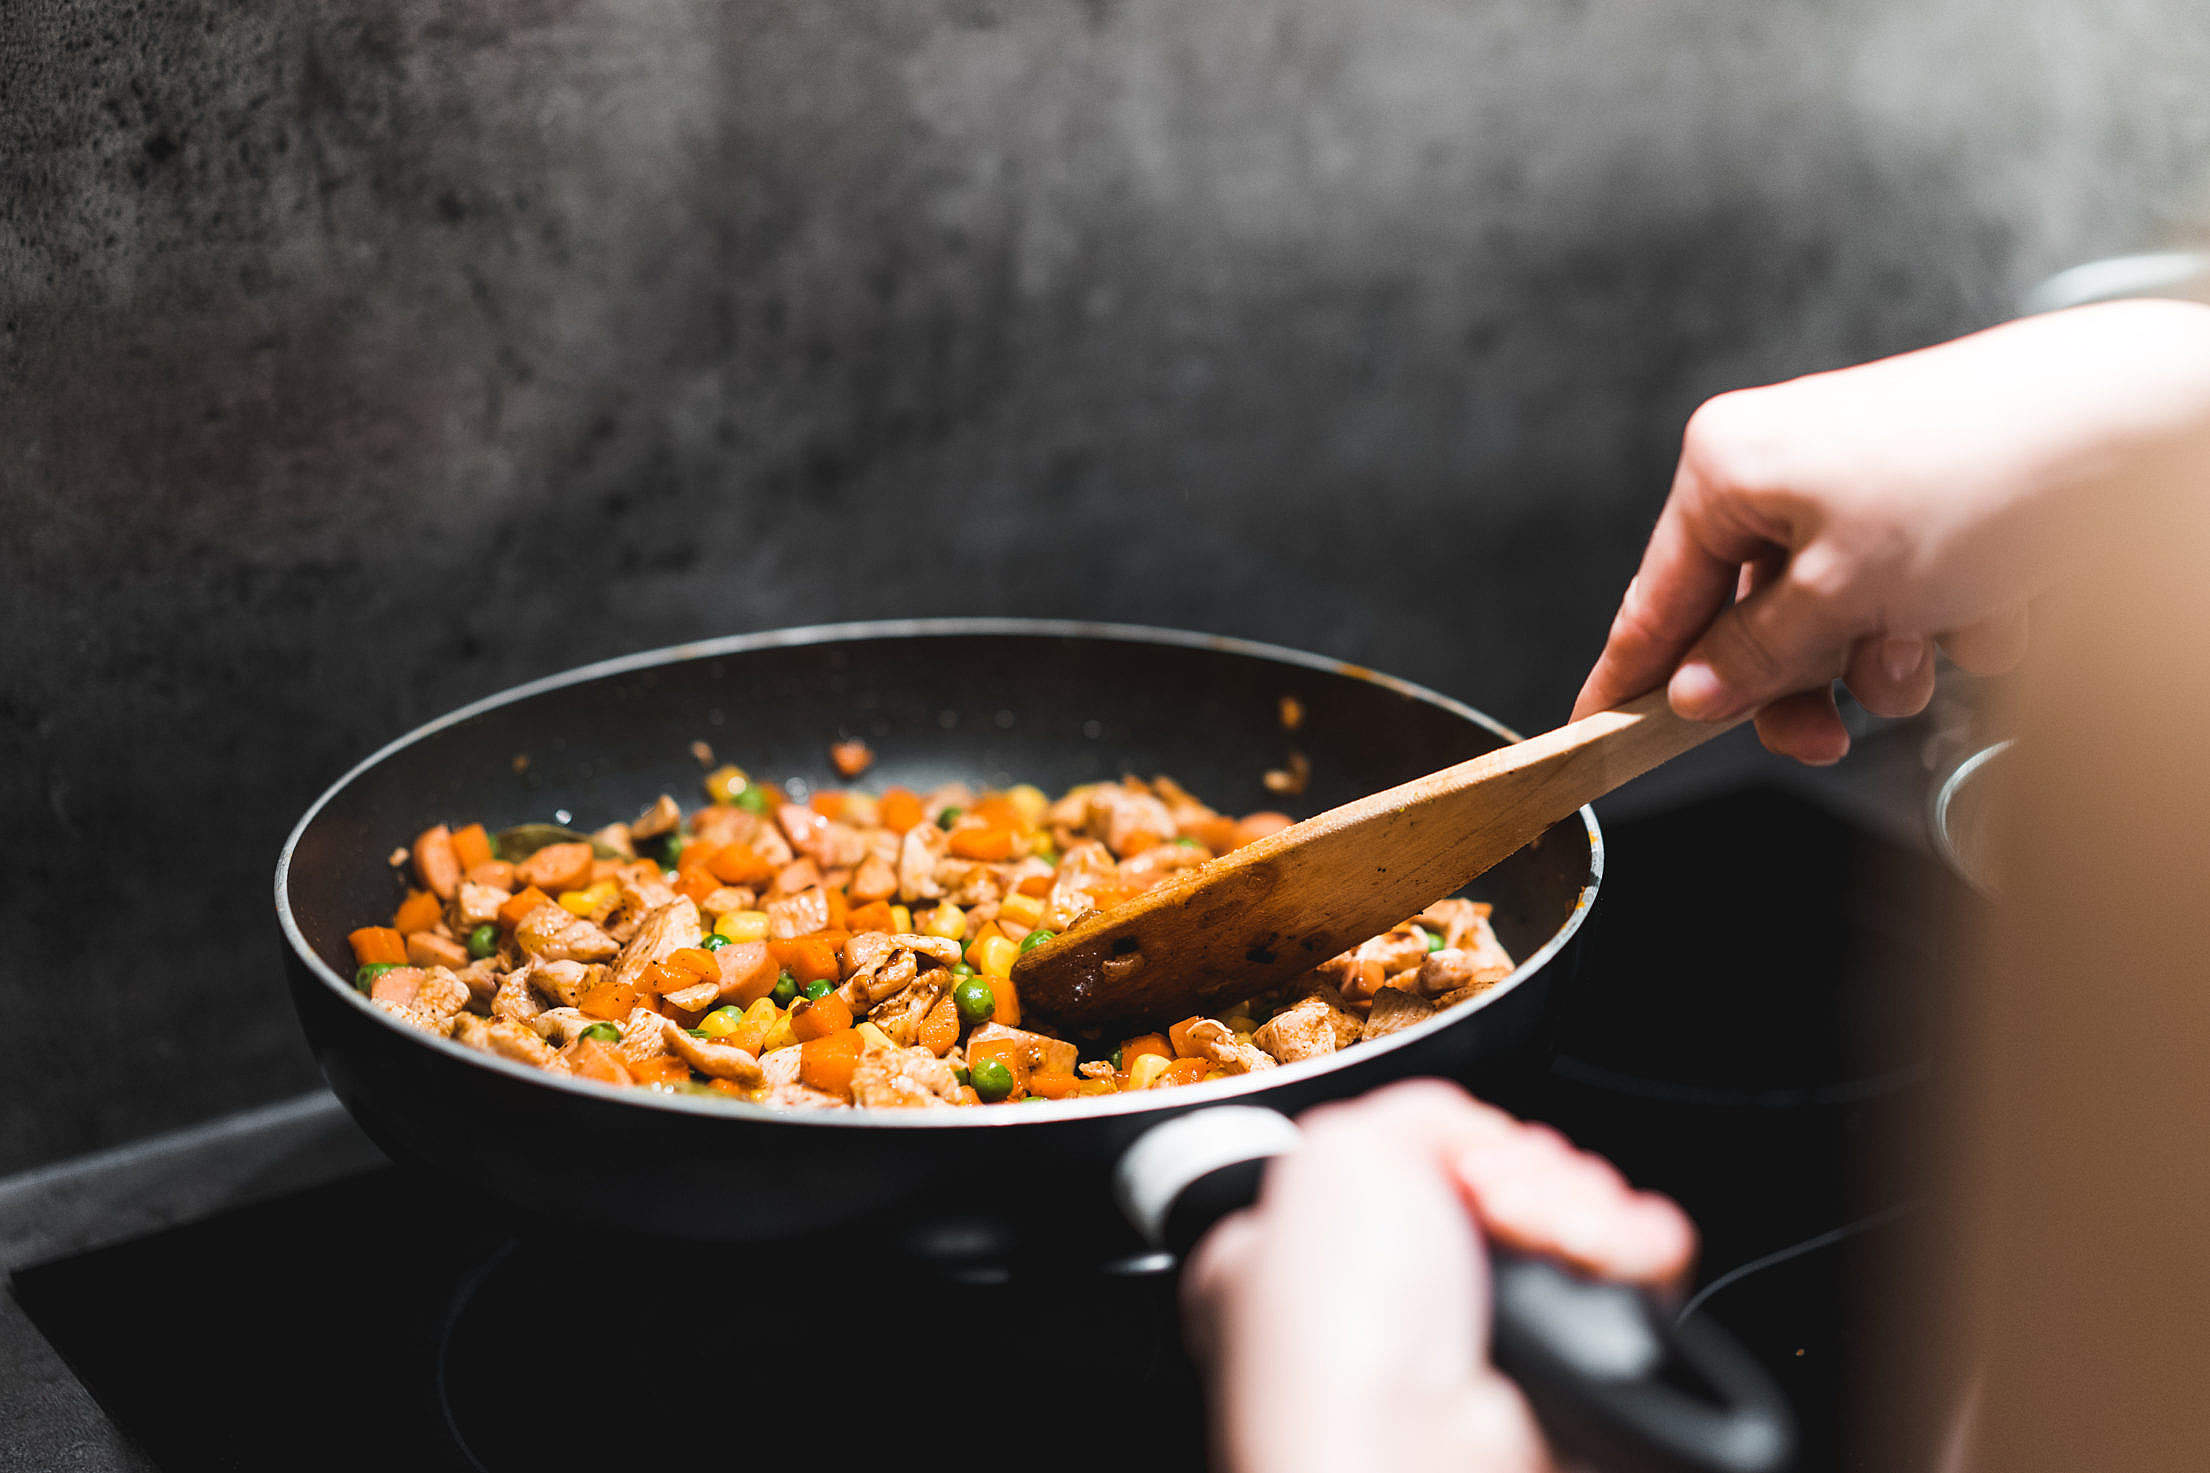 Wok Stir Fry Chicken and Vegetables Free Stock Photo